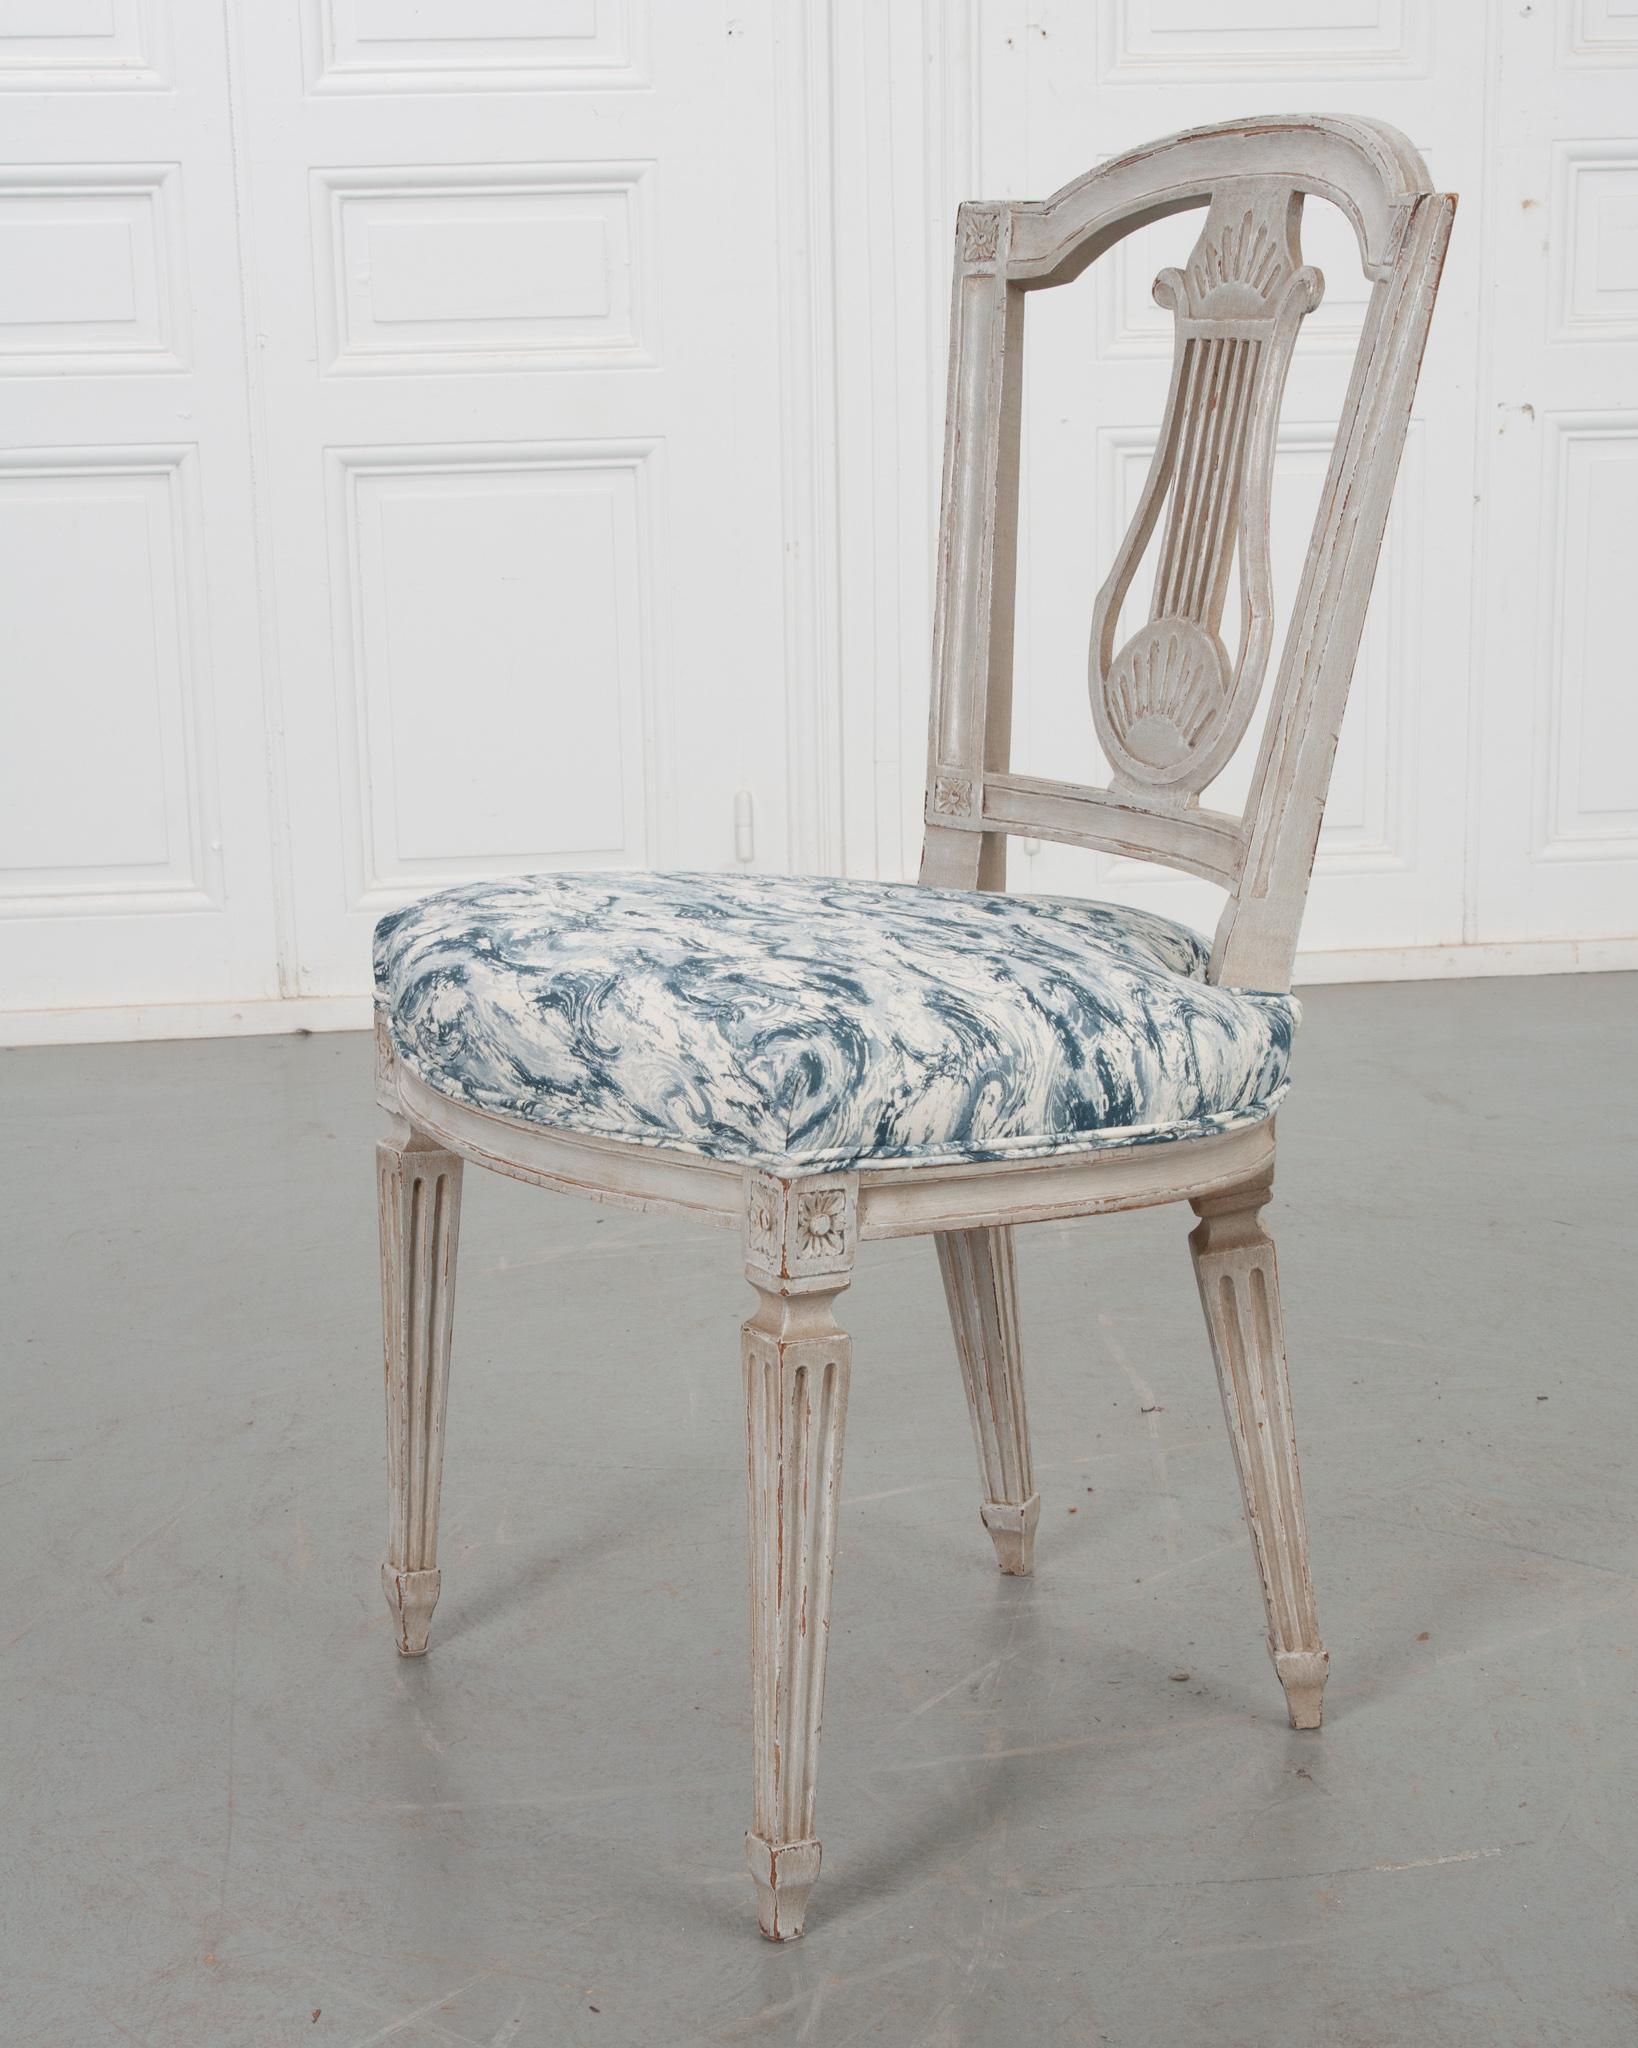 This Swedish style chair is full of character! Painted to look old and and recently upholstered in a Zak + Fox linen fabric. Supported by tapered, fluted legs. Seat height is 18-½”. Make sure to view the detailed images for a closer look at this